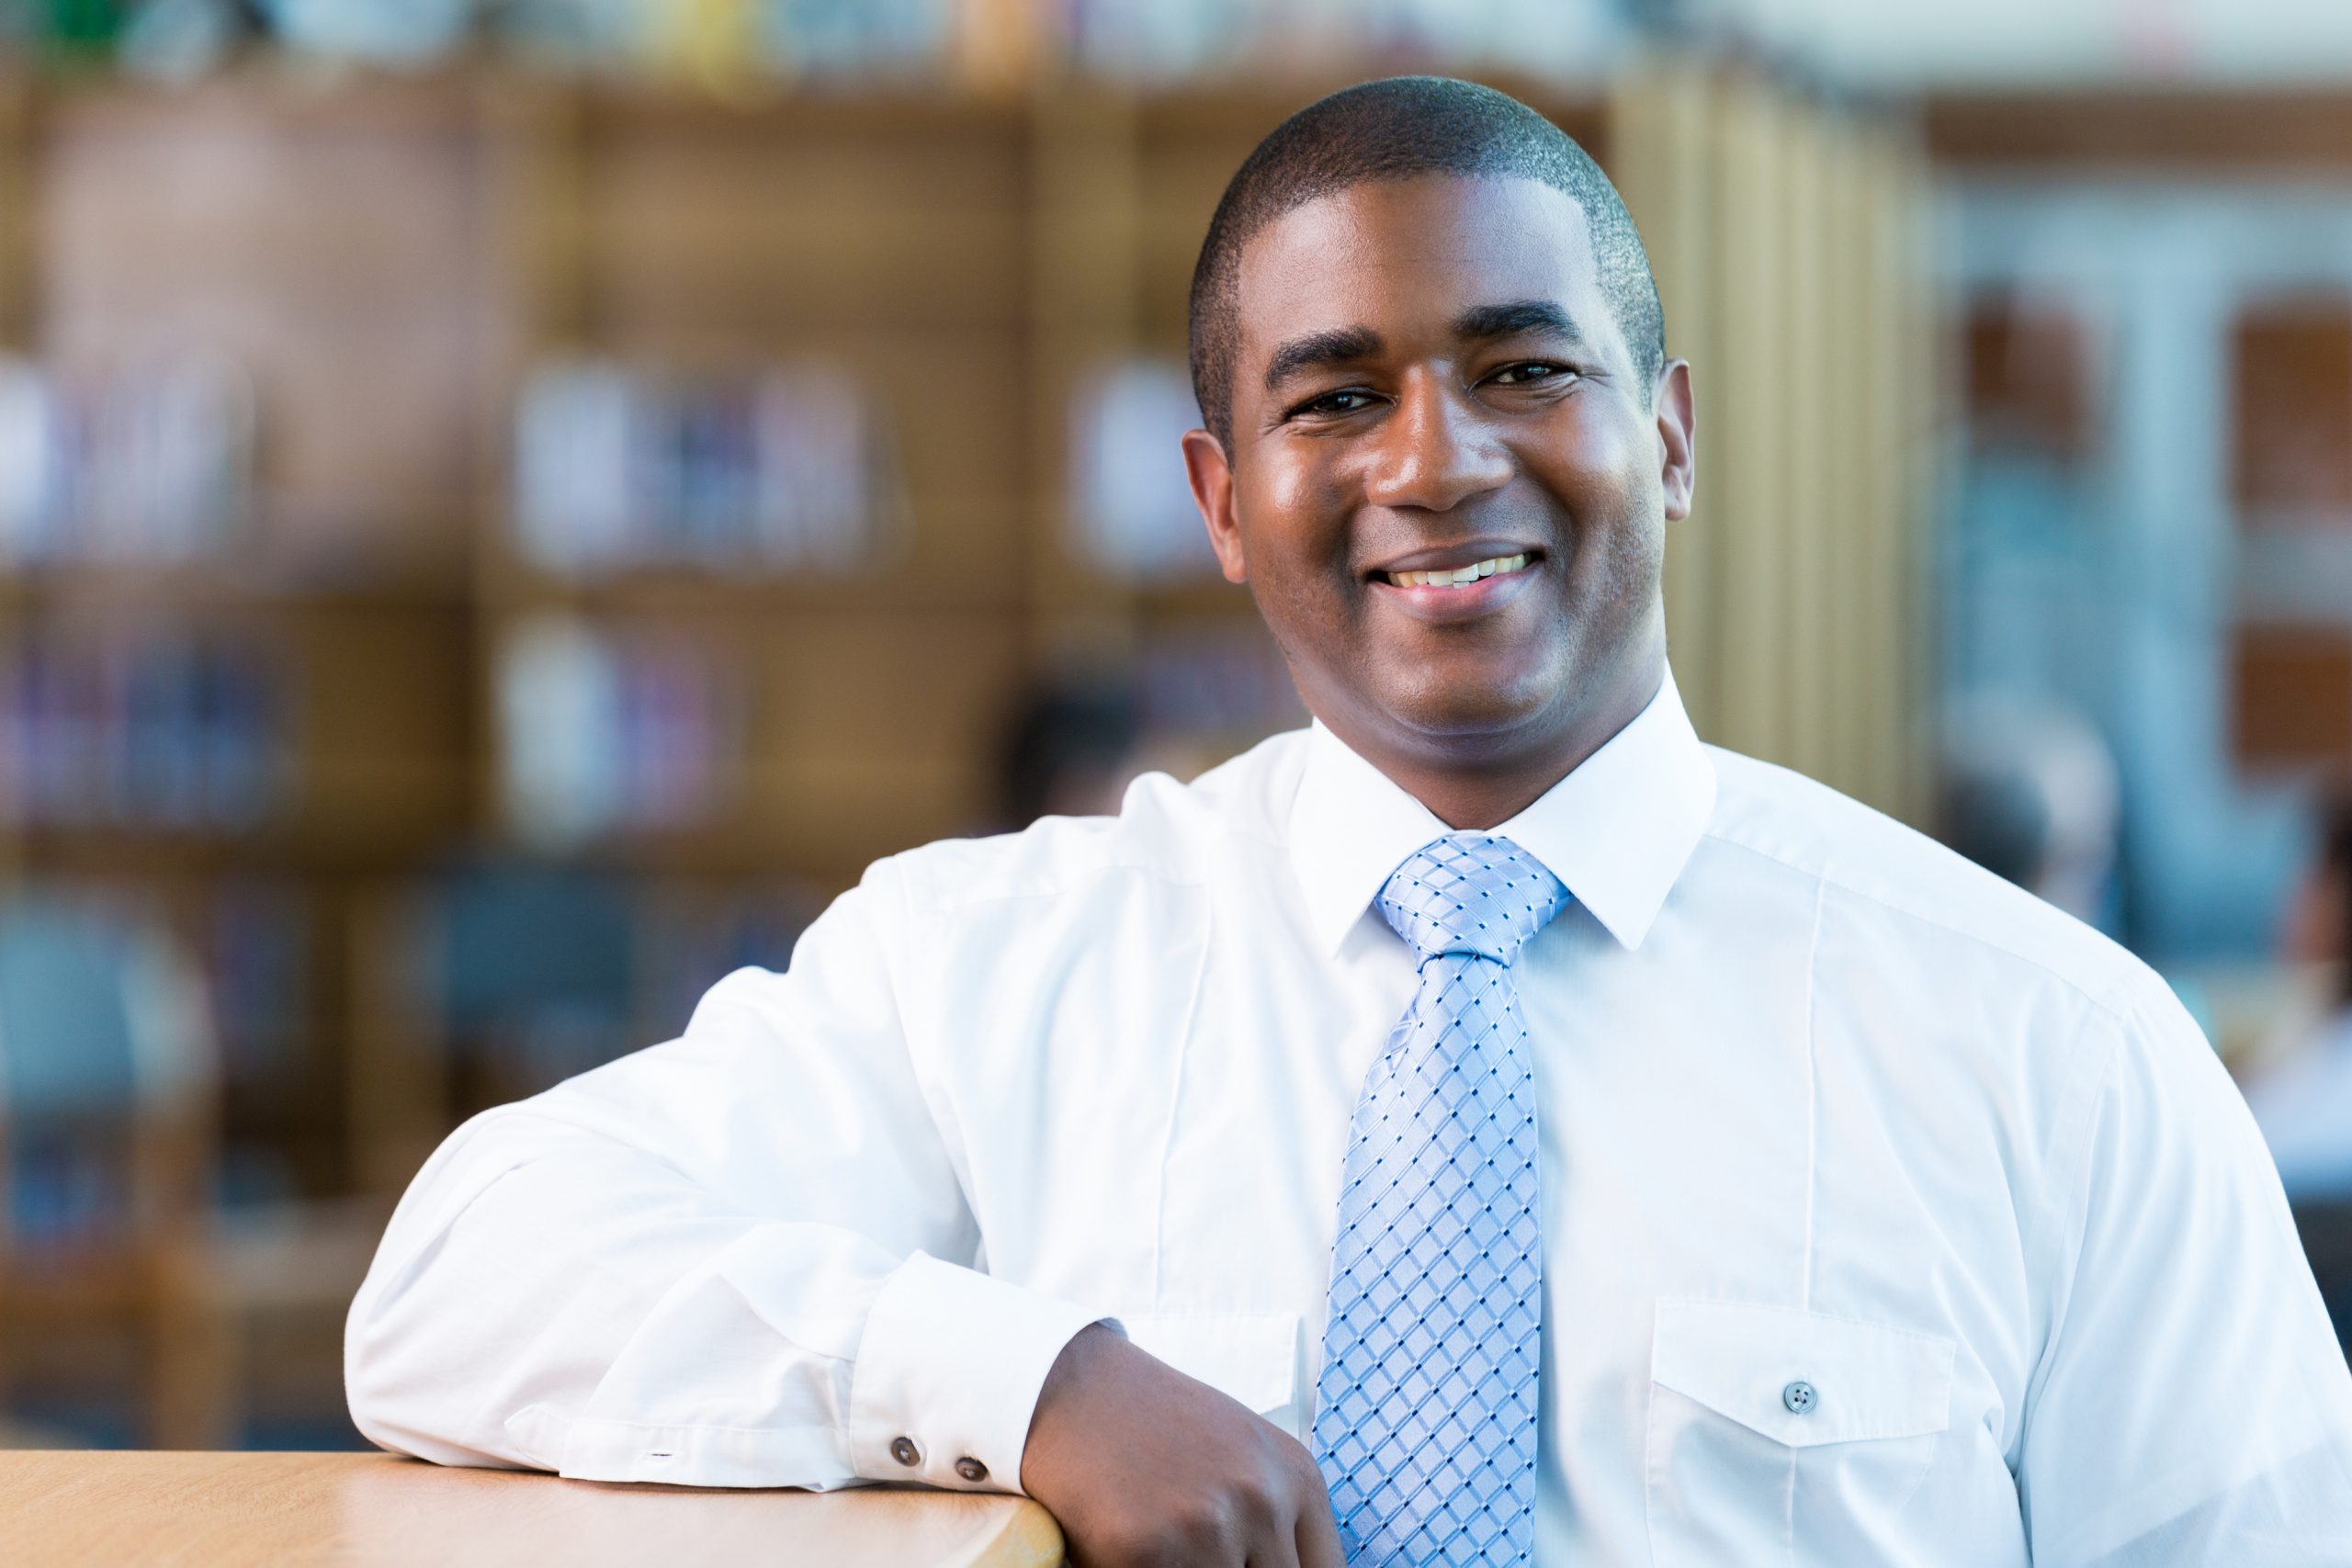 Mid adult African American teacher smiles in high school library. He is leaning on a bookshelf. He is wearing a white button-down shirt a light blue patterned tie.